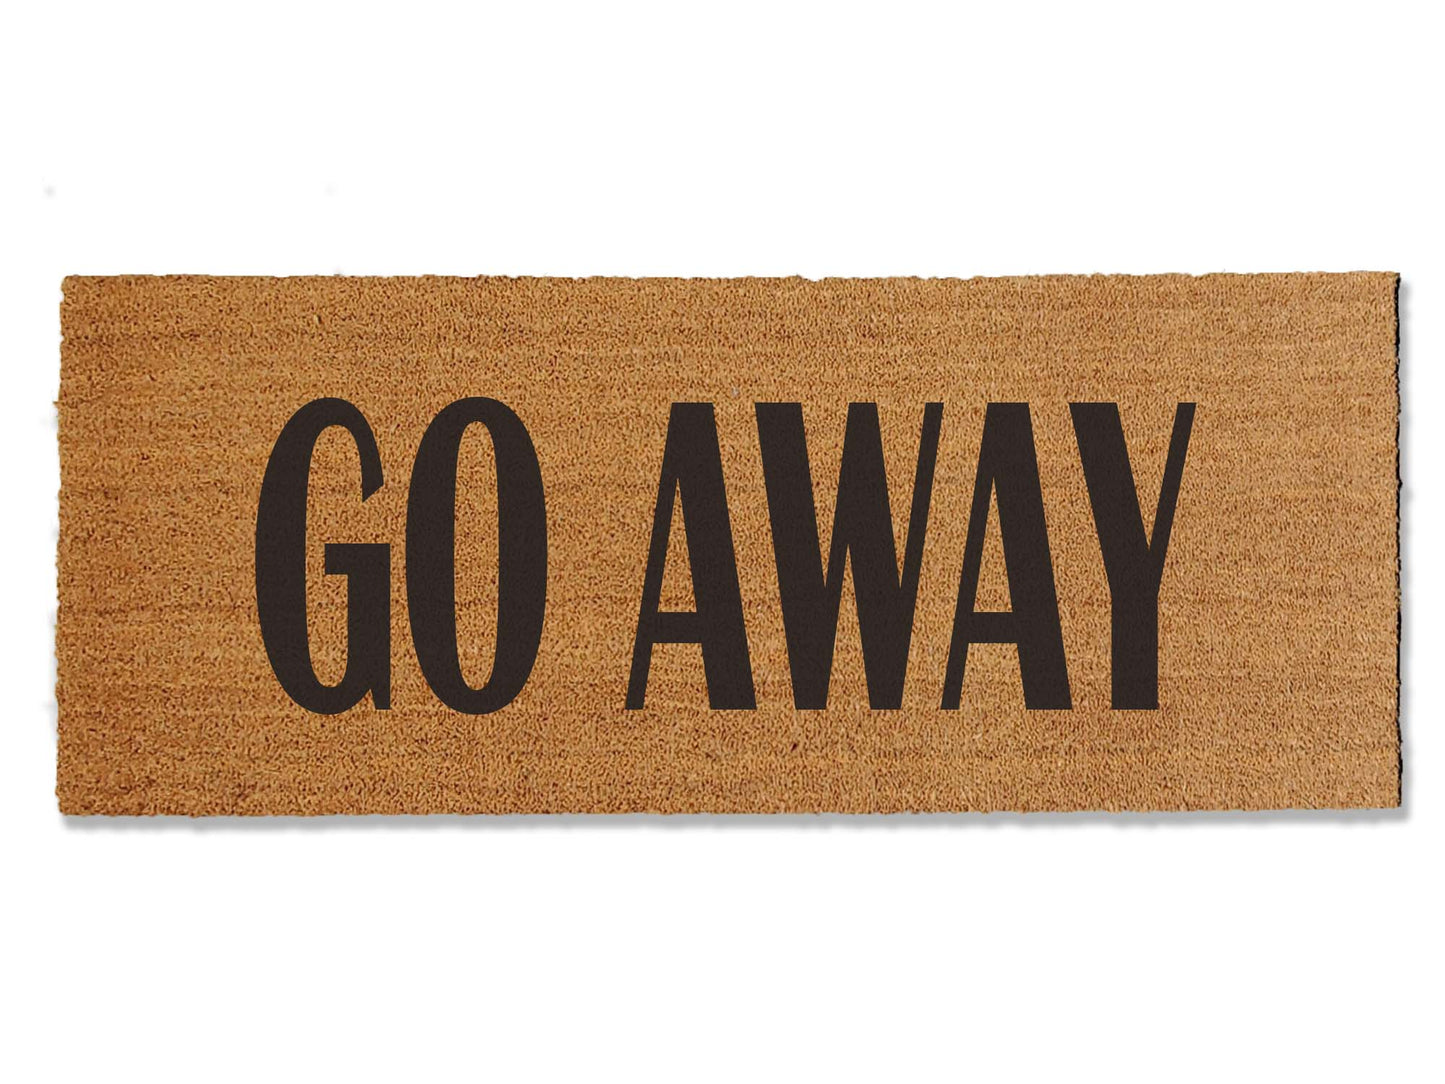 Make a bold statement with our 'Go Away' coir doormat, offered in multiple sizes. Add a touch of humor to your home with this funny and slightly rude doormat. Choose the perfect size to make a statement and set the tone for your entryway.